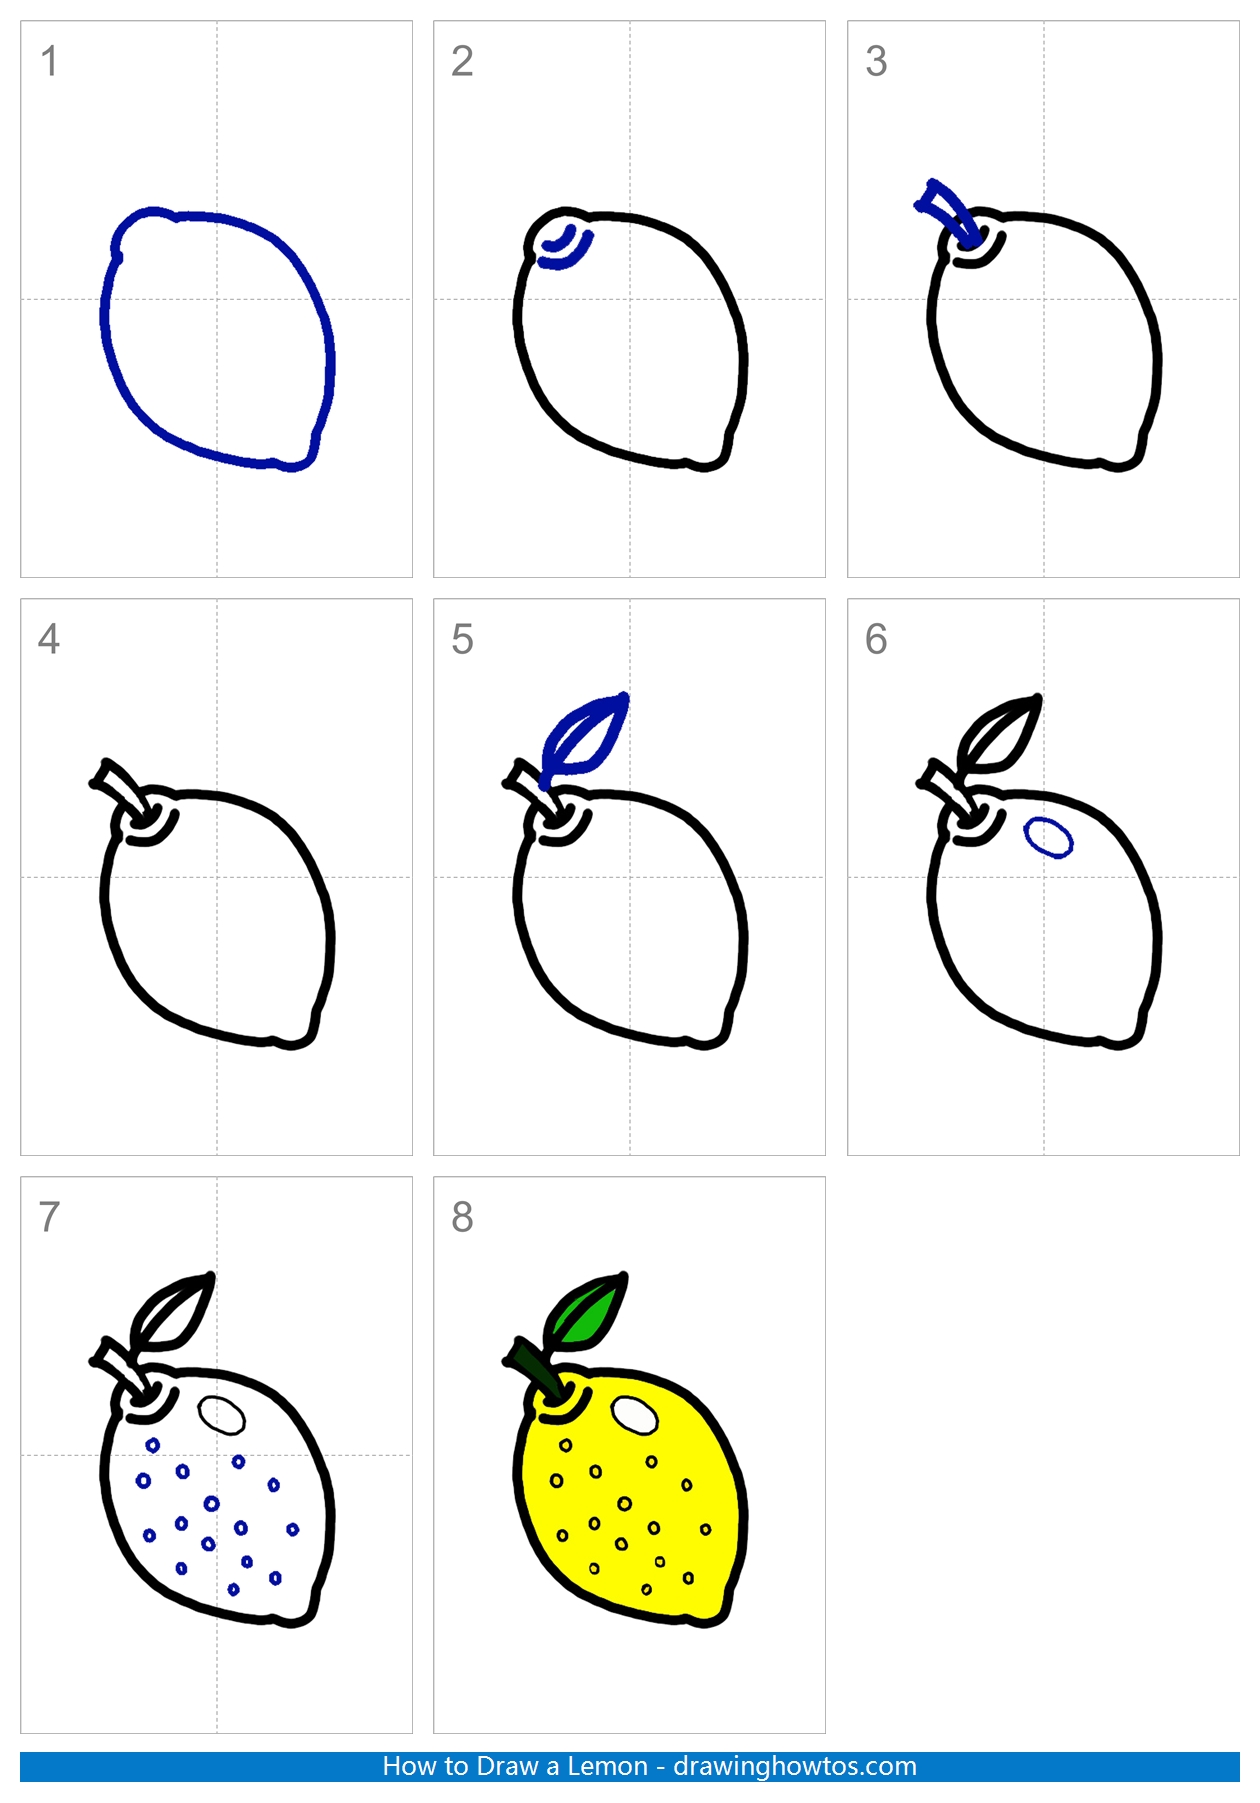 How to Draw a Lemon Step by Step